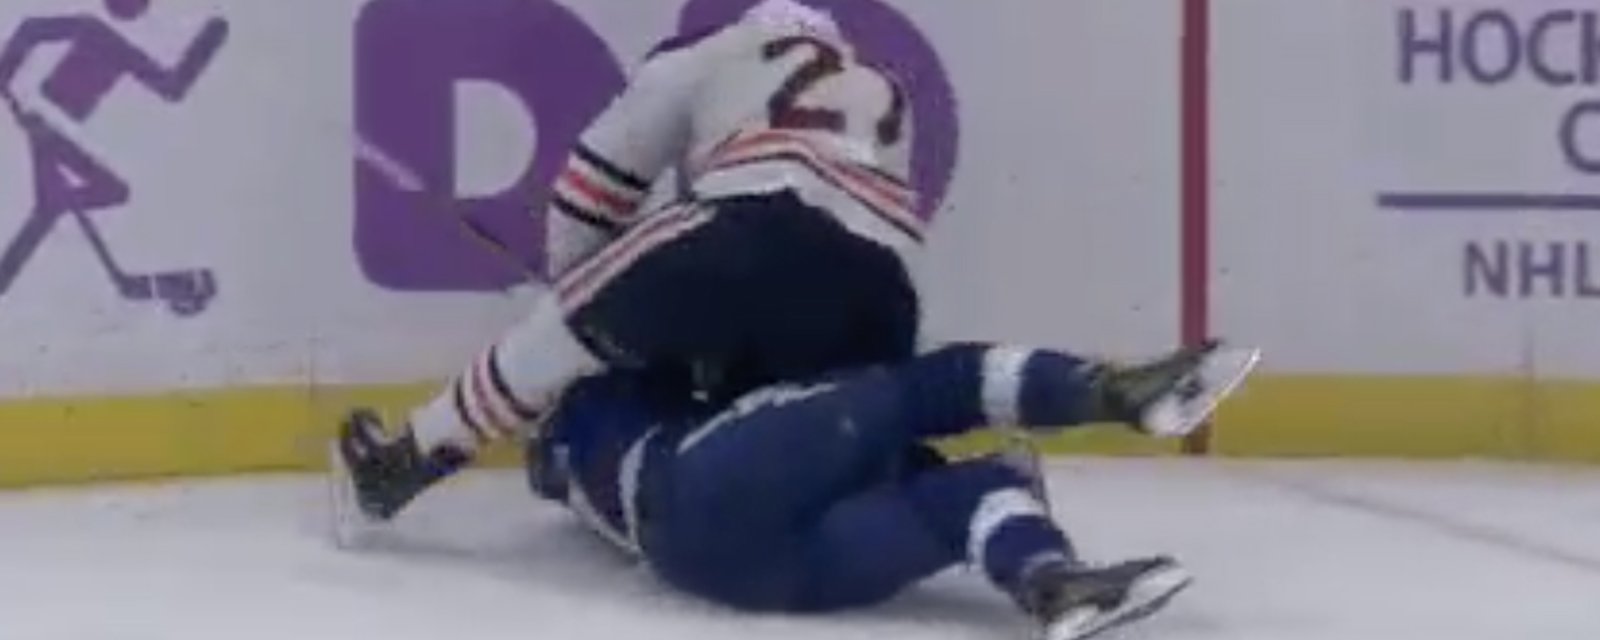 Lucic tracks down star rookie for payback and almost starts a line brawl